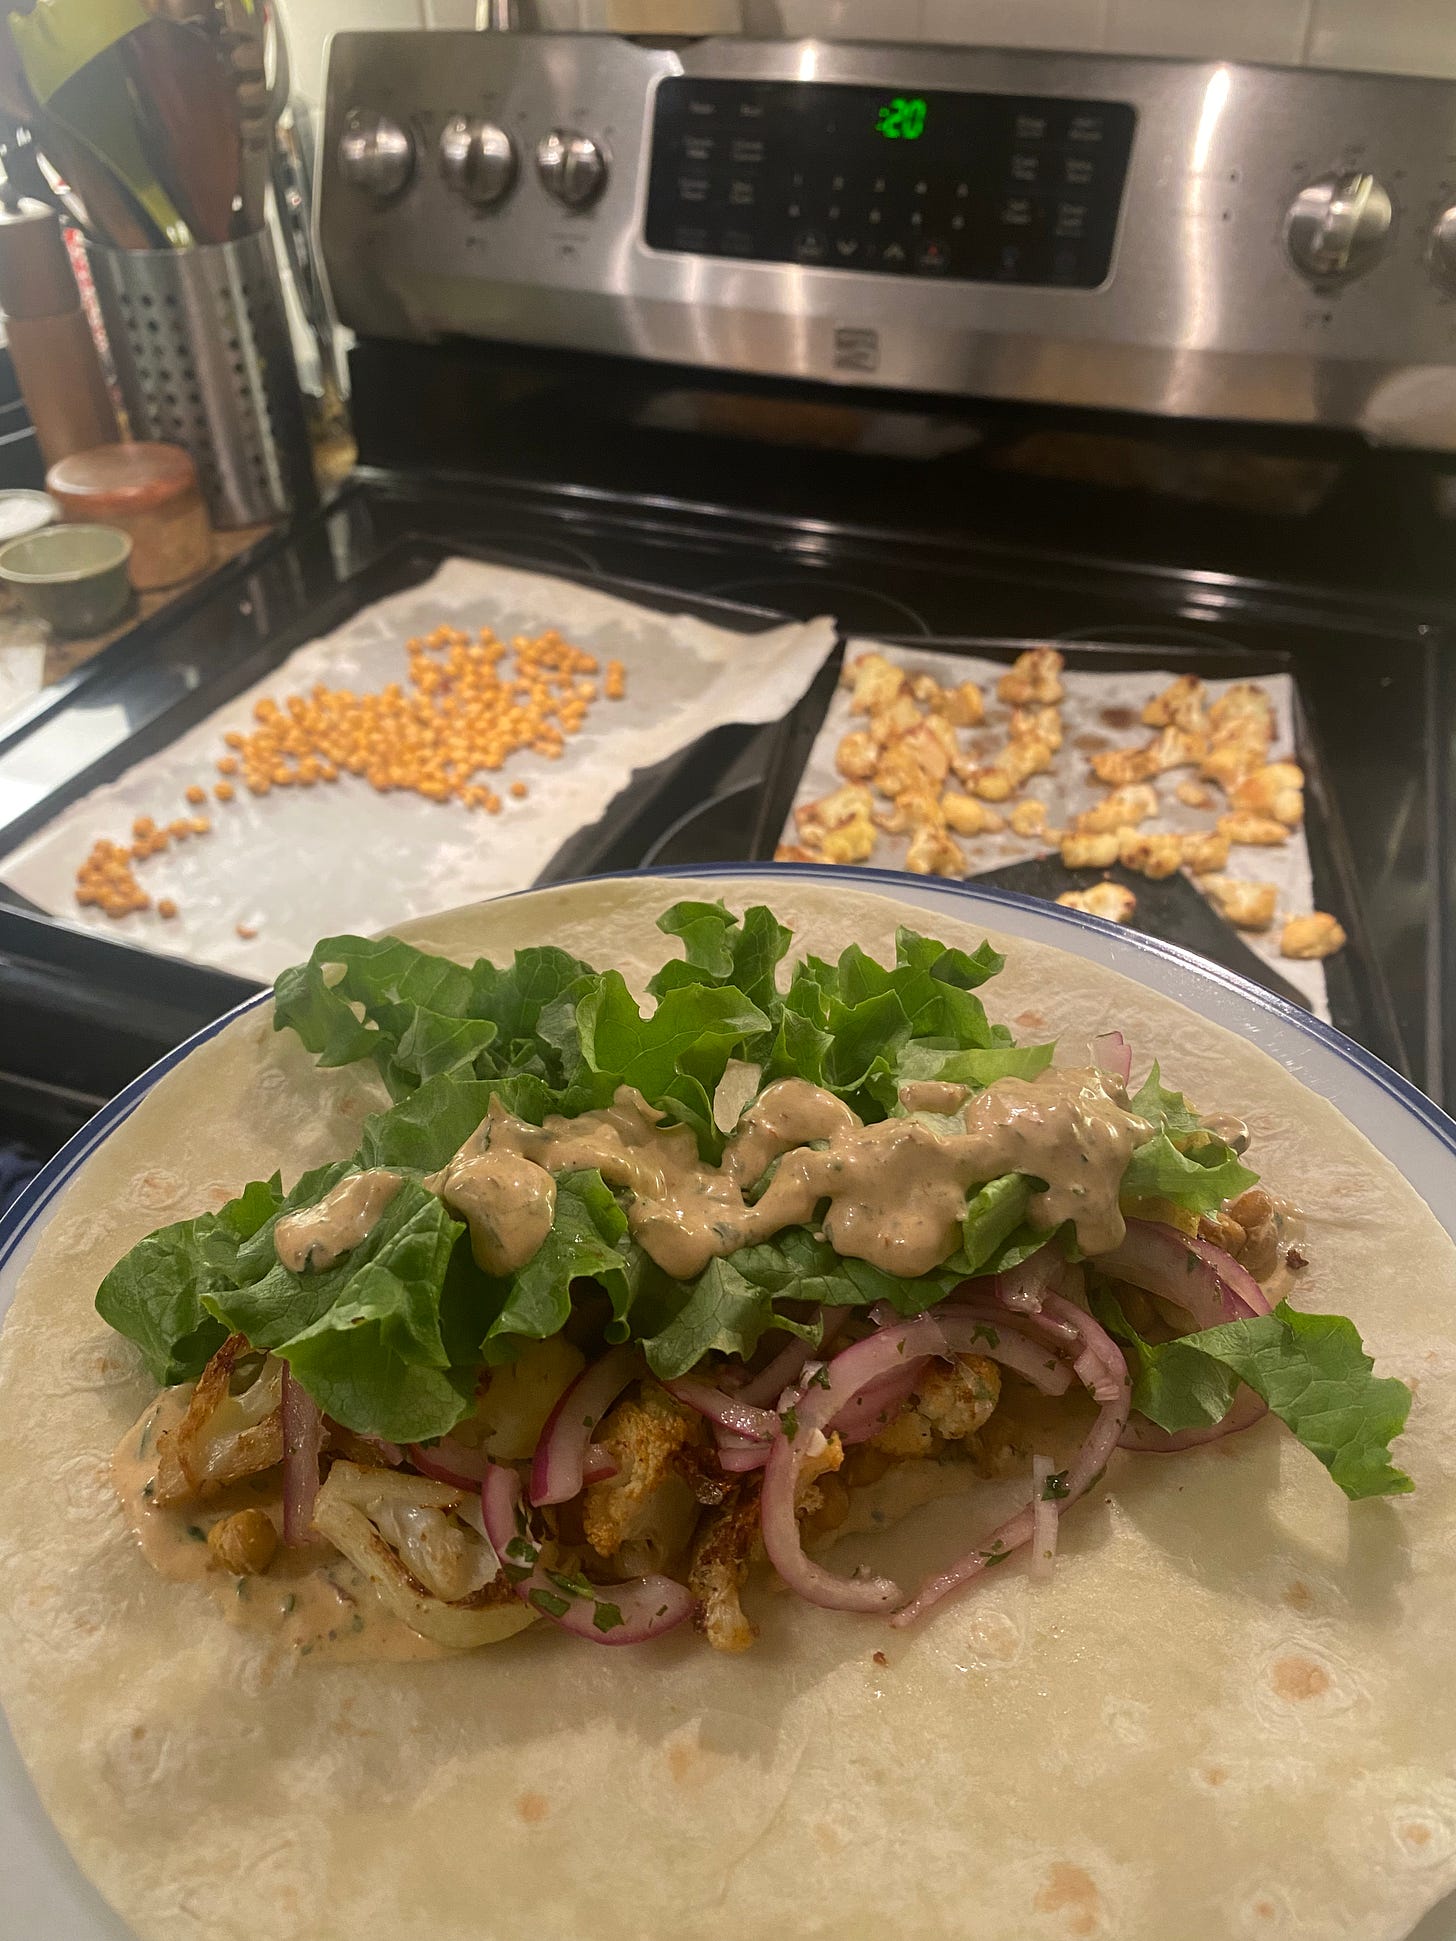 In the foreground on a plate, an open tortilla with the chickpeas, cauliflower, and onions underneath green lettuce and the sauce described above. In the background on top of the stove, the two baking pans of chickpeas and cauliflower are visible.